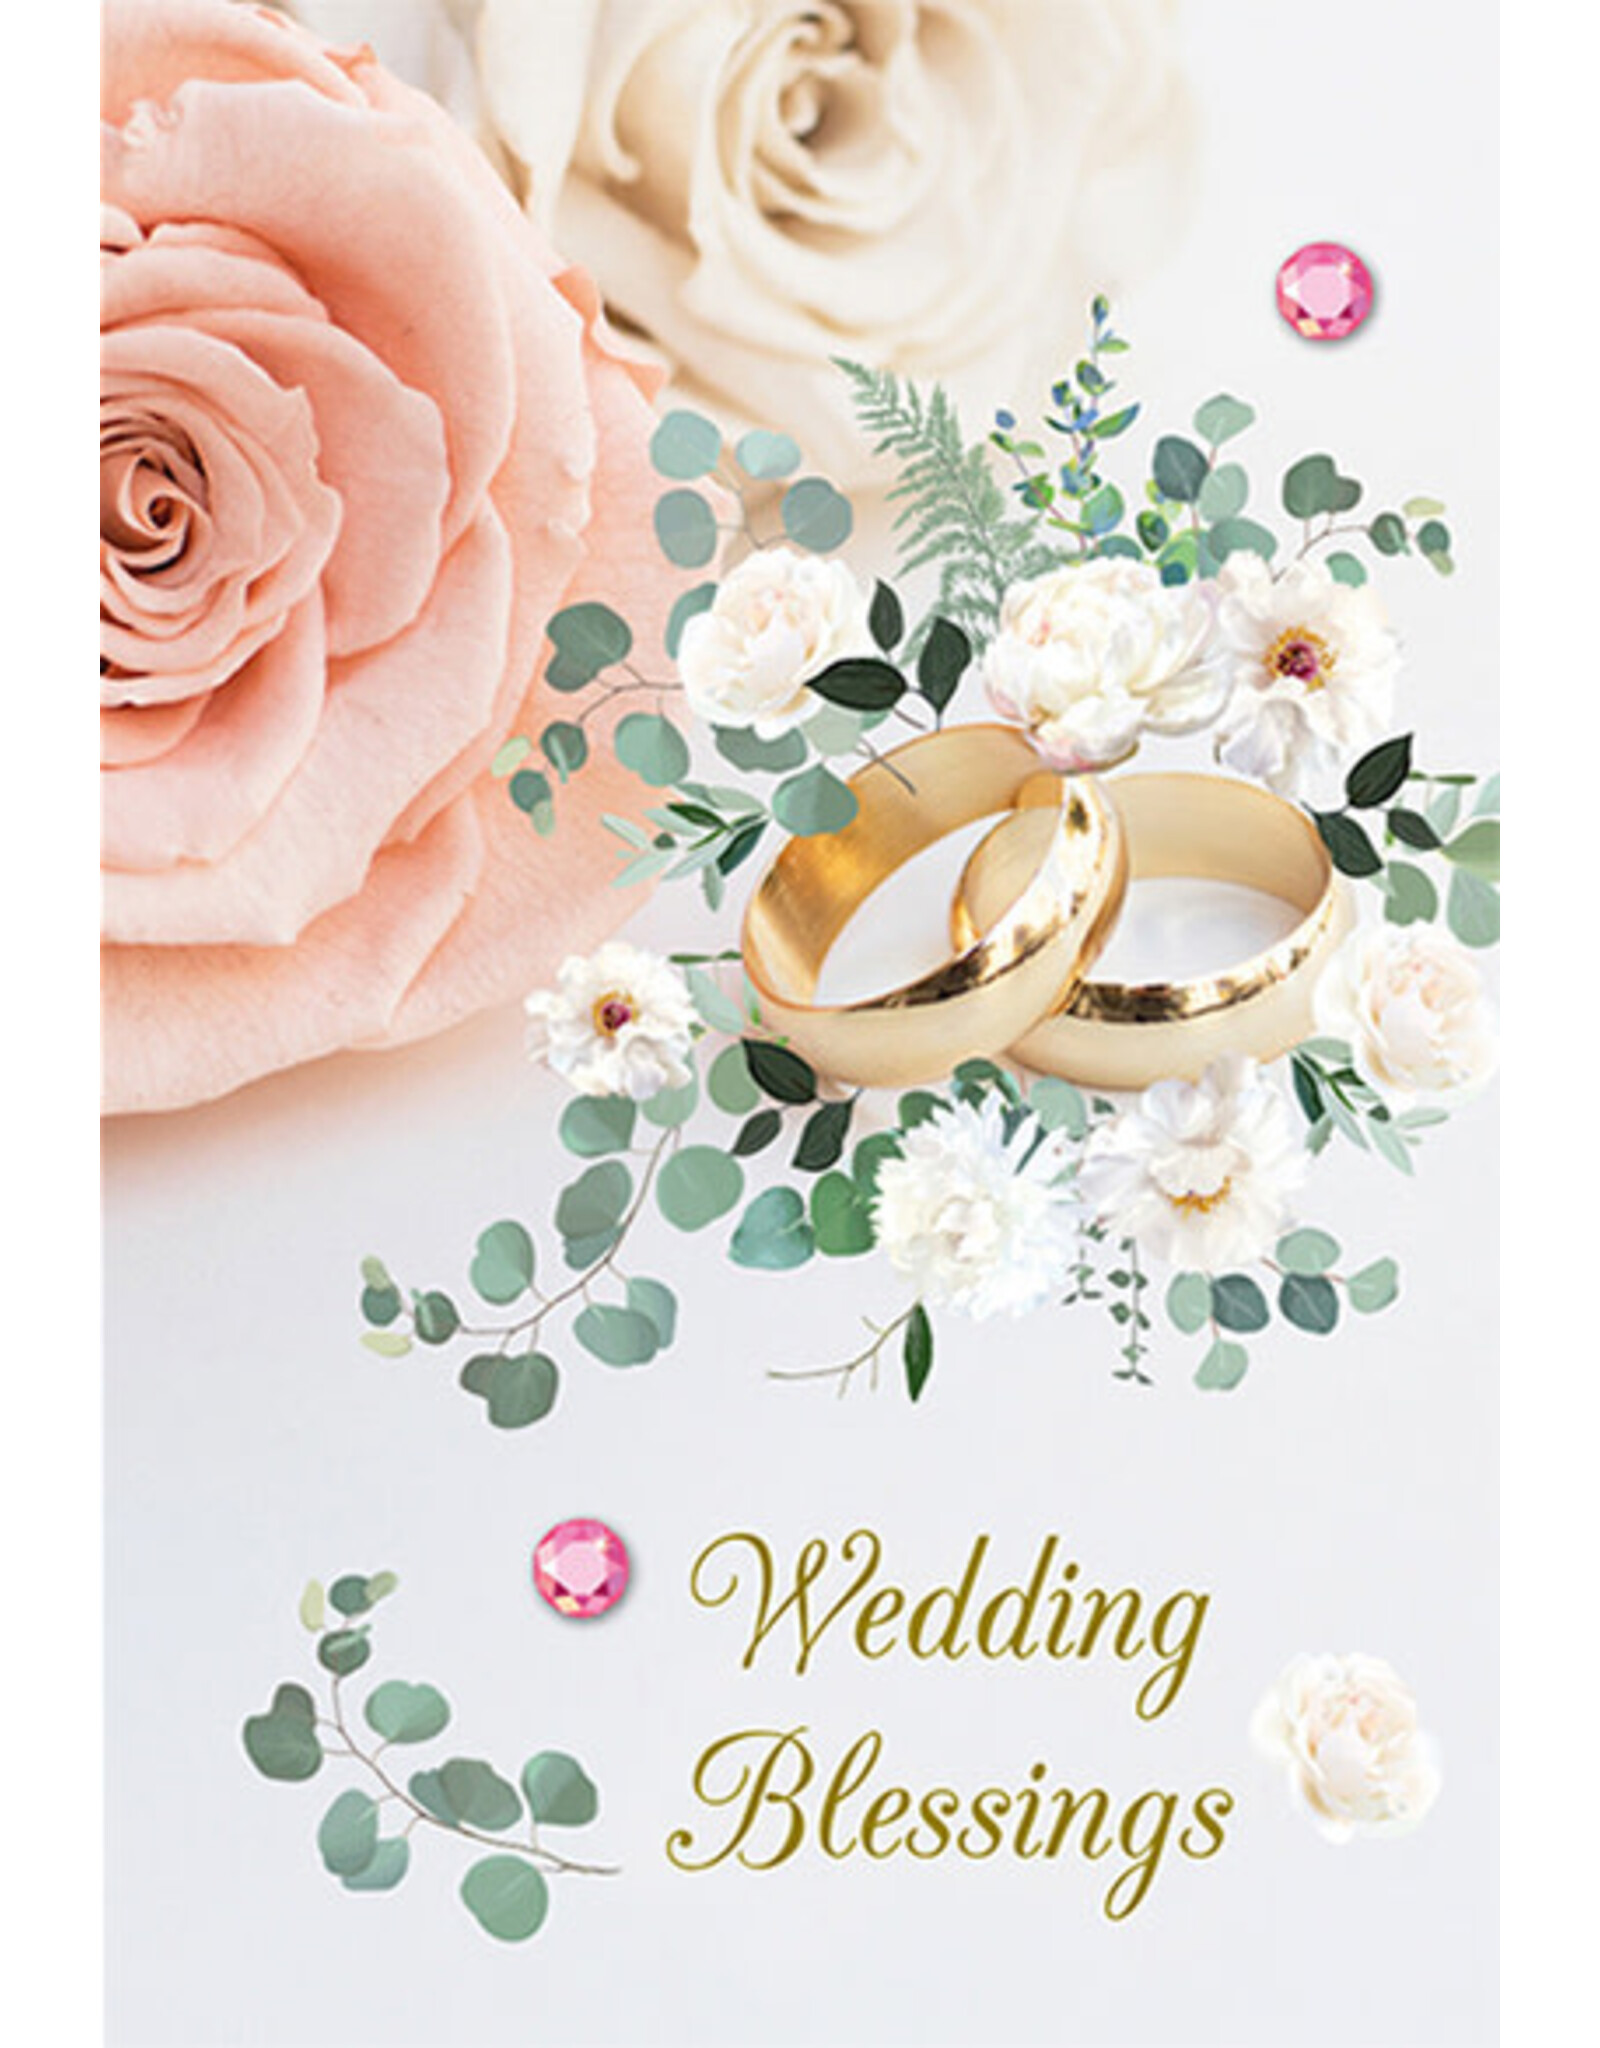 Greetings of Faith Card - Wedding, Floral Blessings